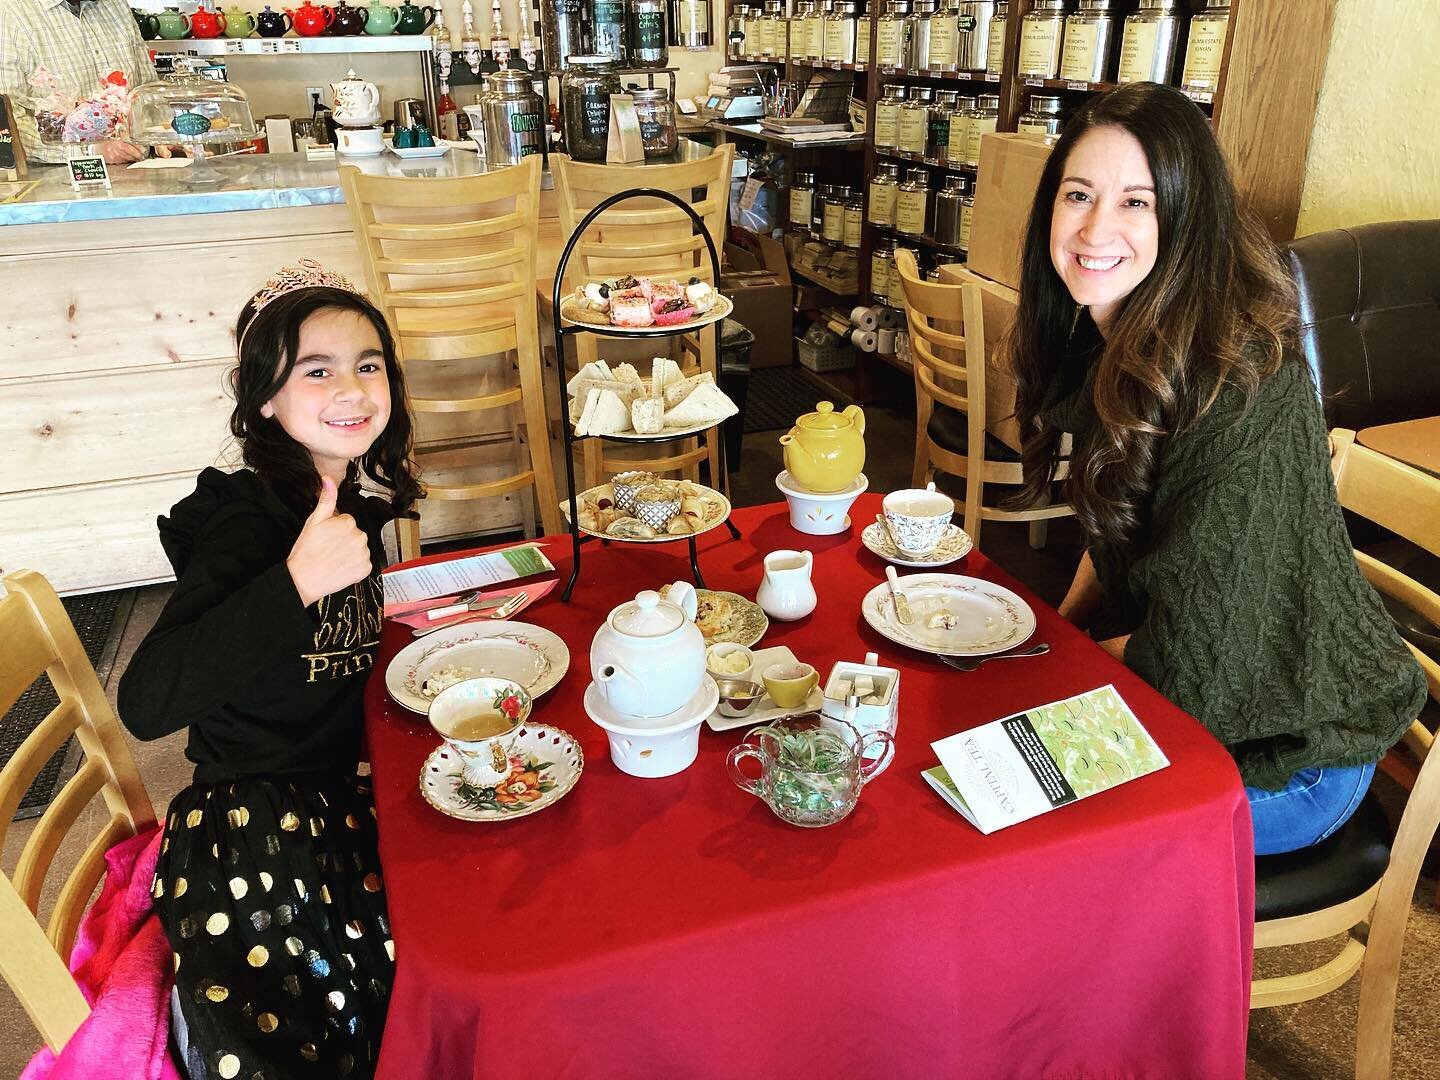 It was our pleasure serving this very special Birthday Princess and her mother Afternoon Tea.  The Princess even managed to keep her pretty pink tiara on the entire visit. Bravo! 
.
.
.
.
.
.
.
.
.
#capitalteadenver #afternoonteadenver #highteadenver